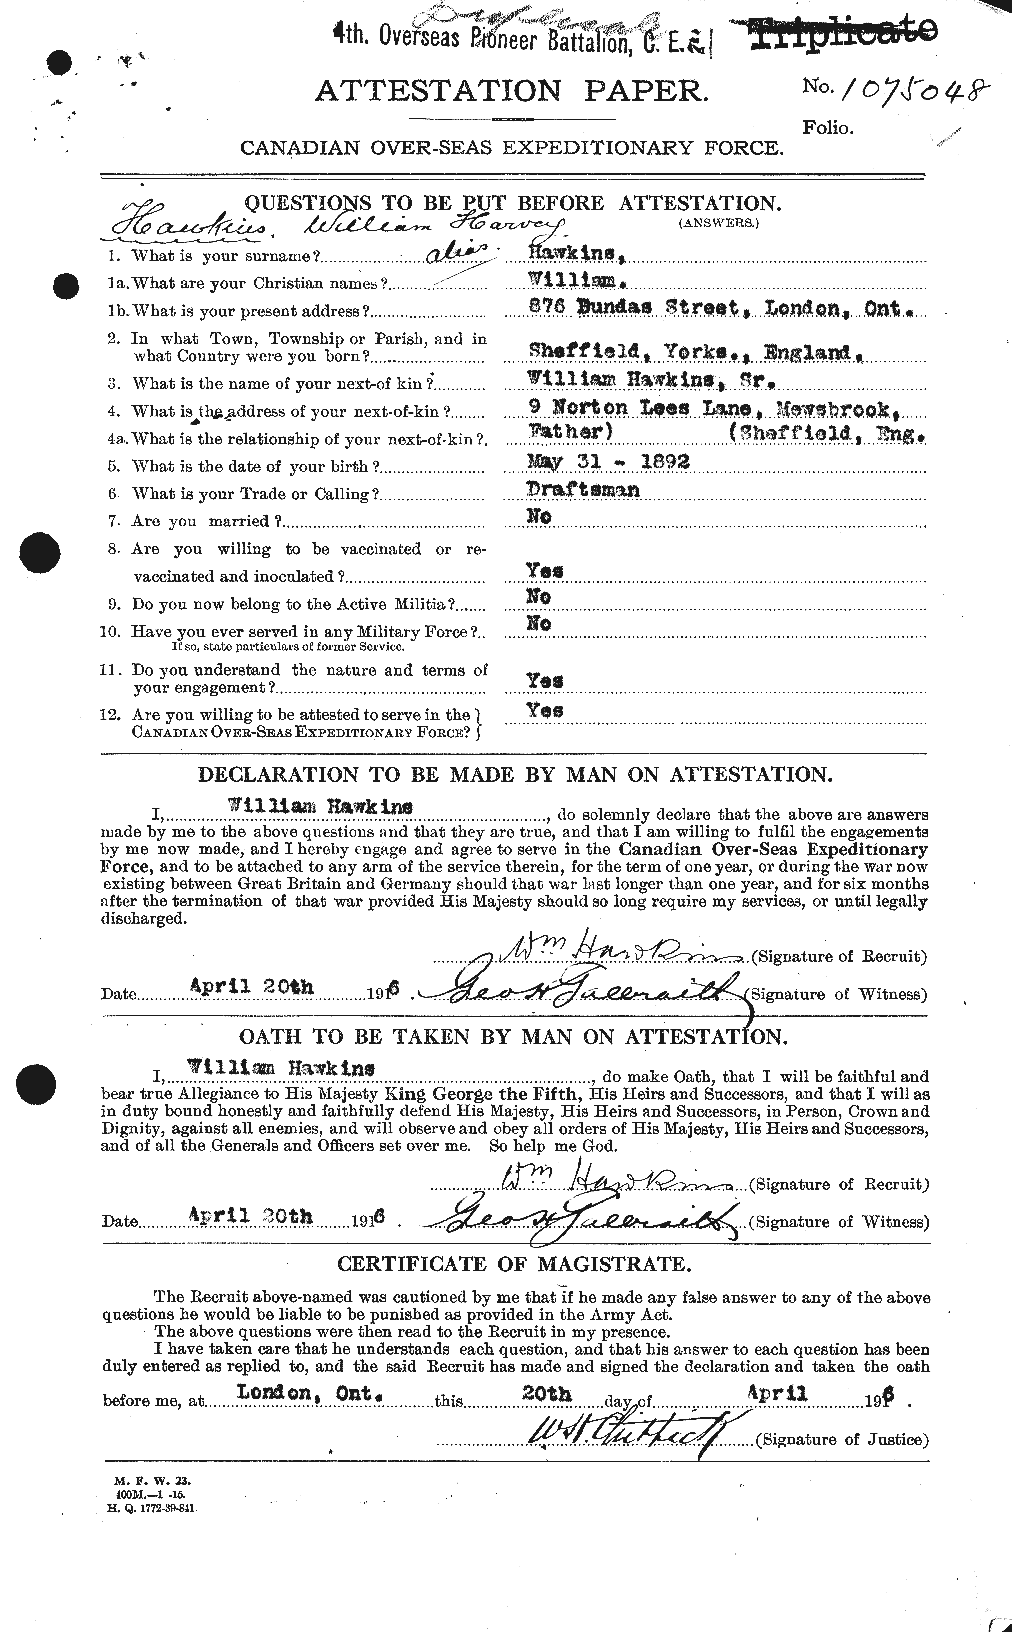 Personnel Records of the First World War - CEF 385641a